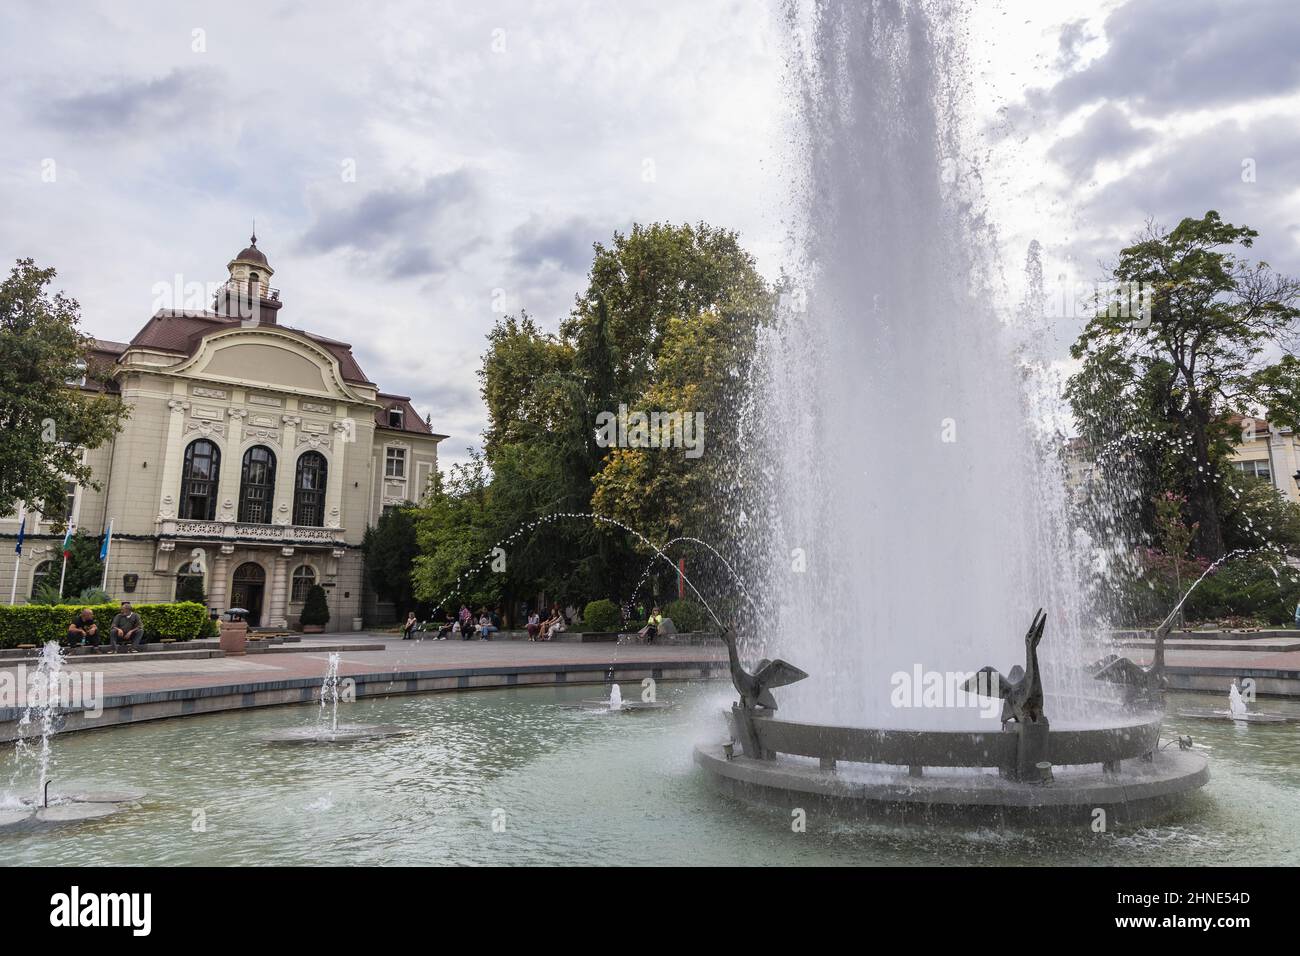 Fountain and Municipality building on Stefan Stambolov Square in Plovdiv city, capital of Plovdiv Province in south-central Bulgaria Stock Photo